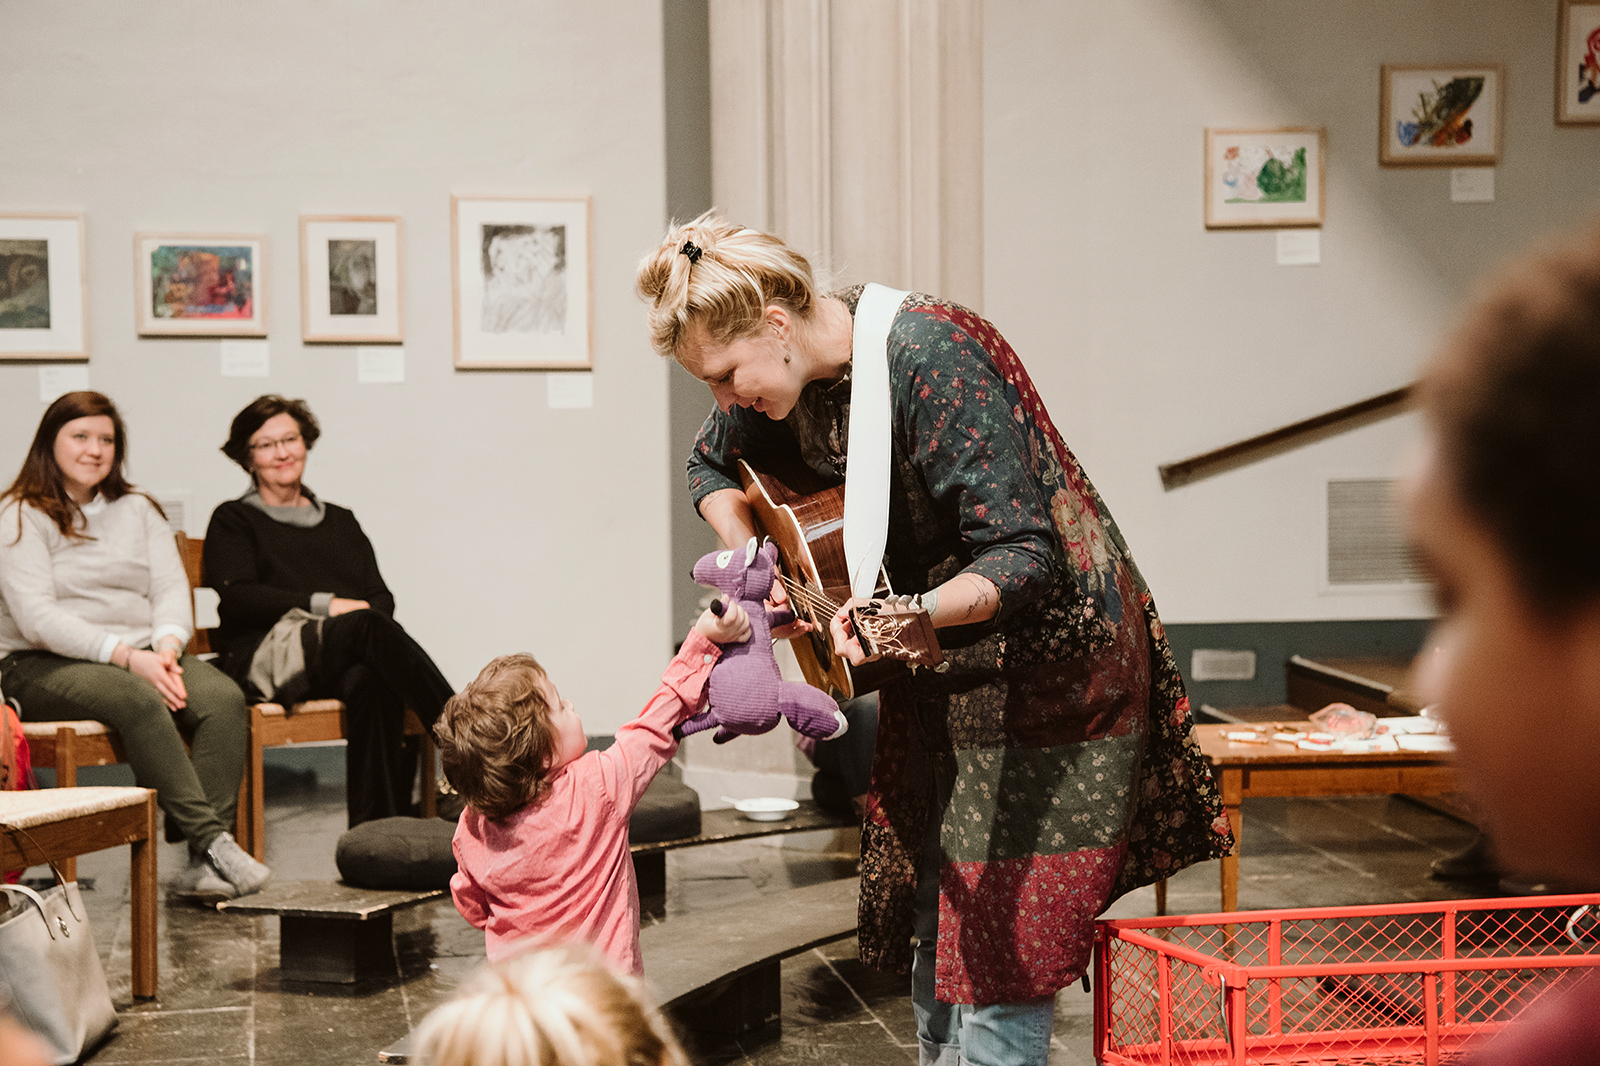 Musician and pastor Rebecca Stevens-Walter interacts with a child during an intergenerational worship service in 2018. (Photo by Ashley Busone Rodriguez)